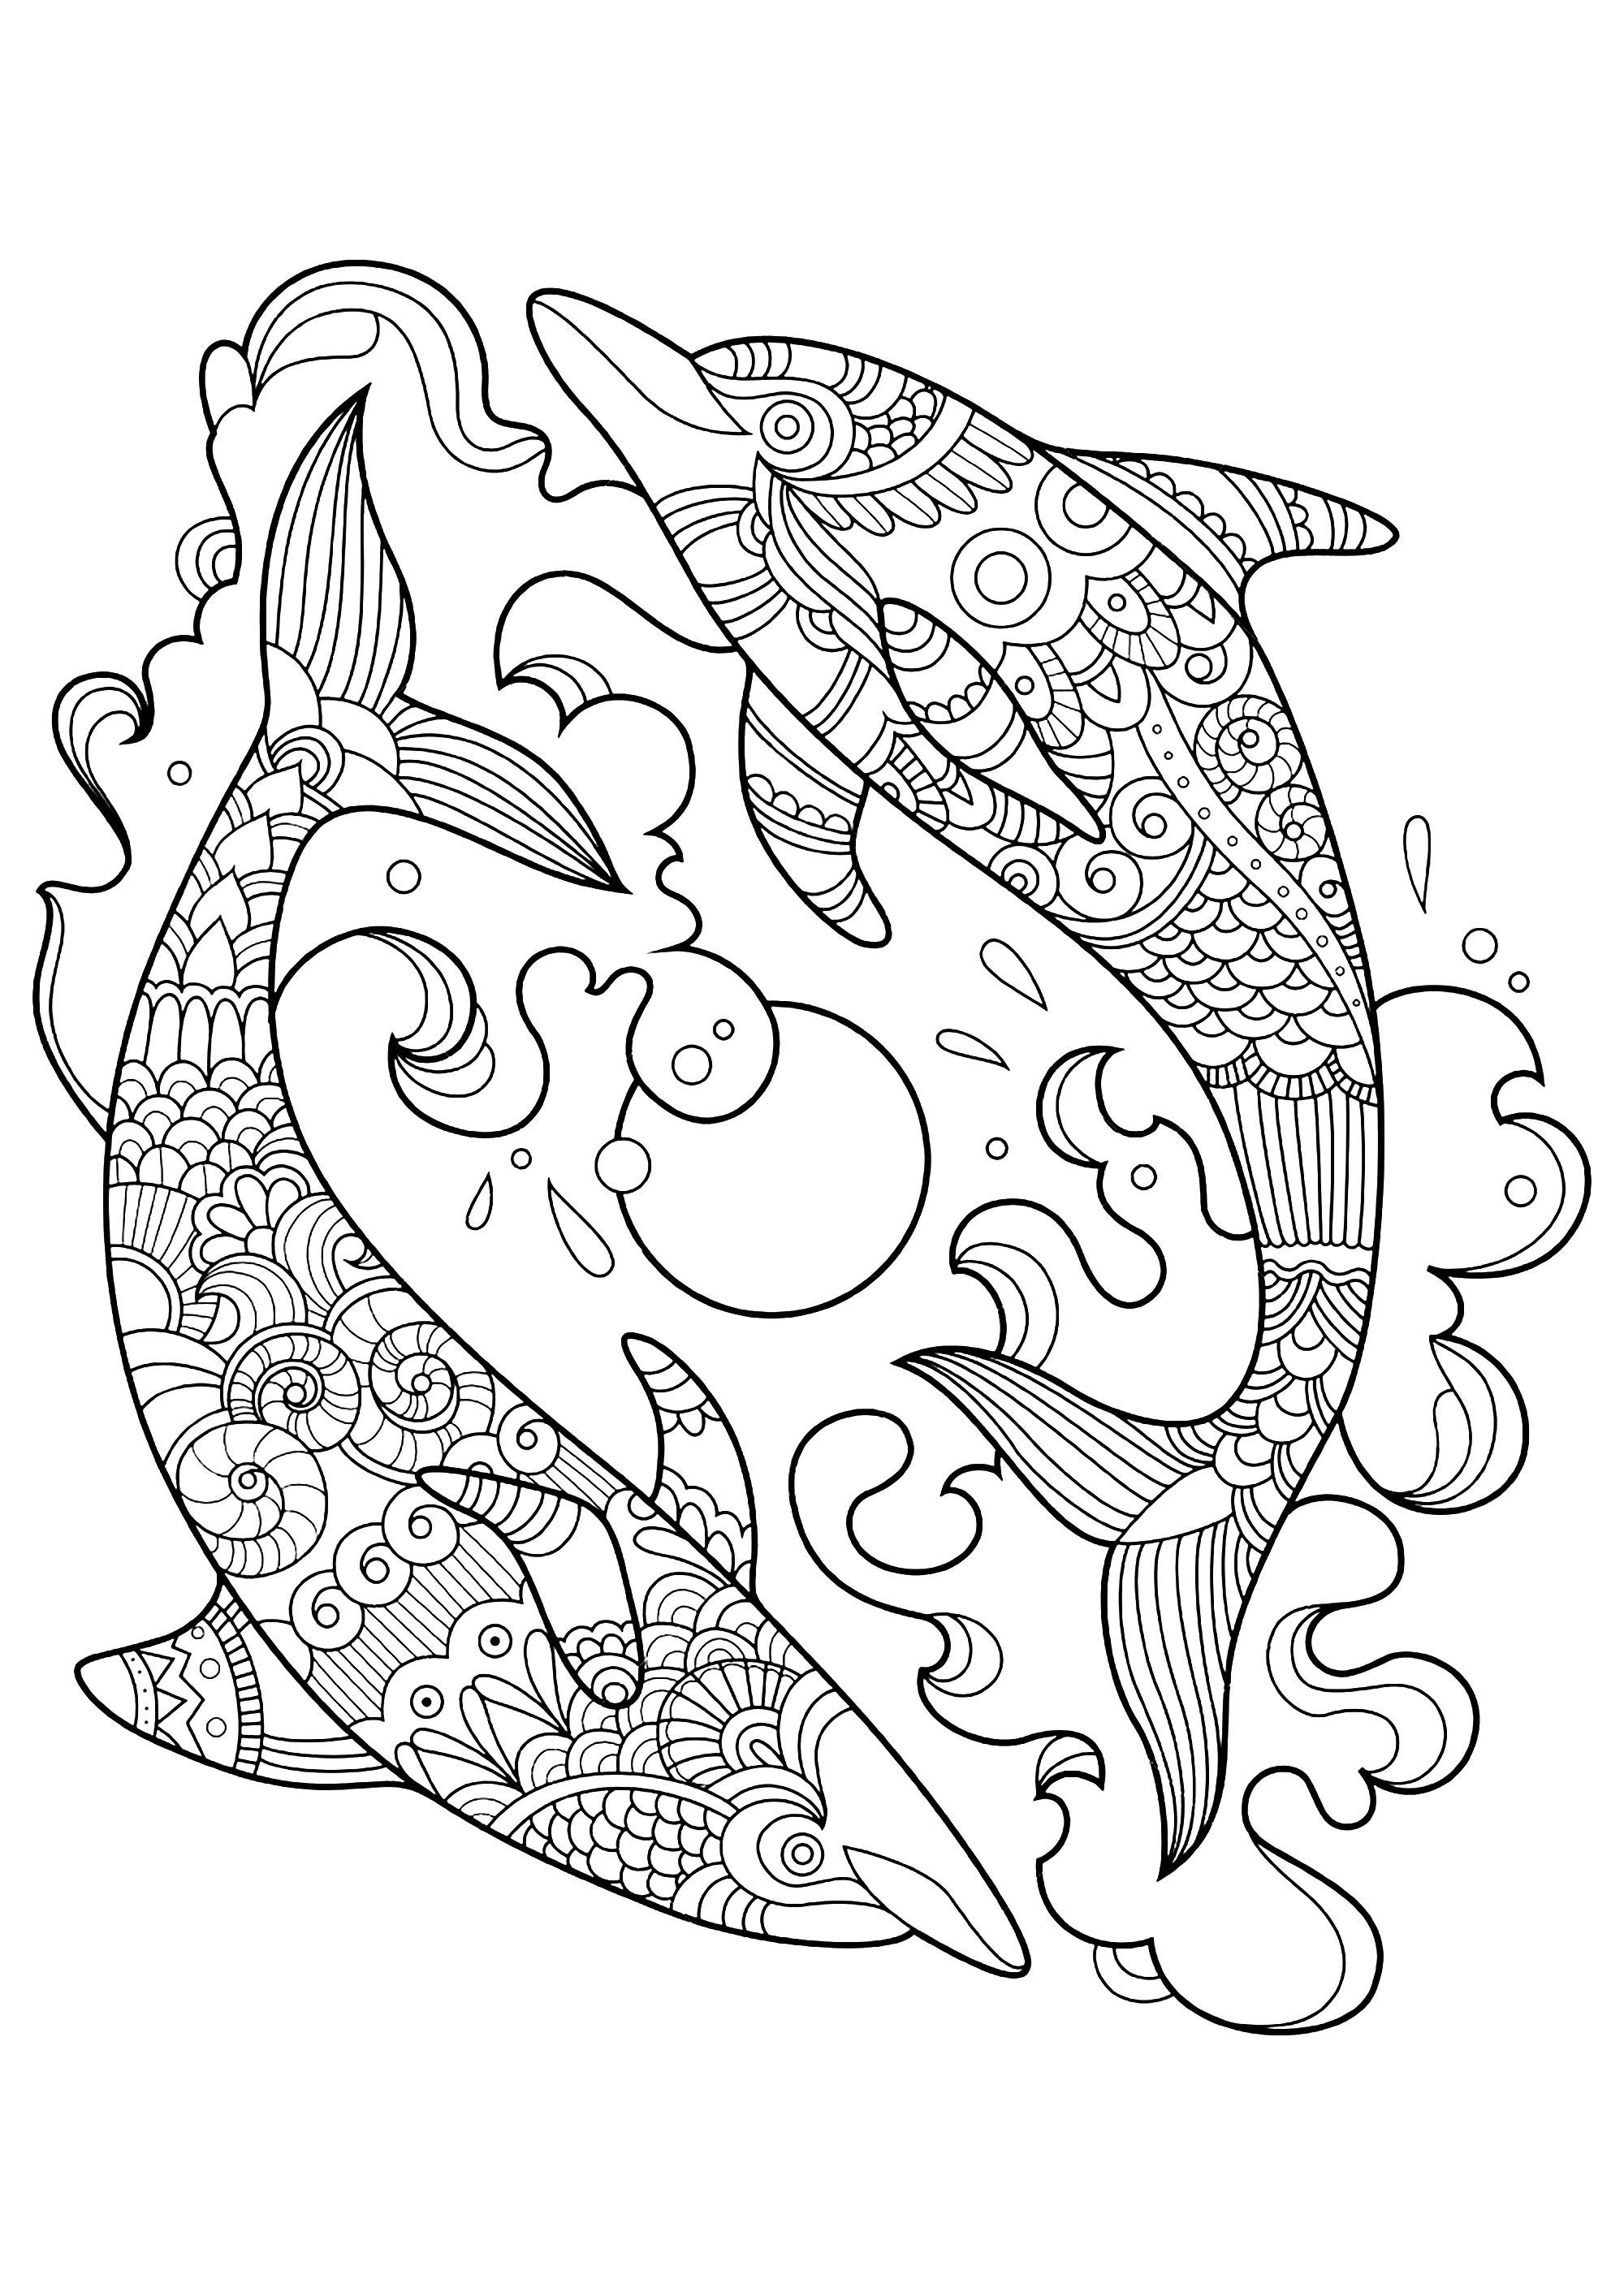 coloring pages of dolphins dolphins to color for children dolphins kids coloring pages of dolphins coloring pages 